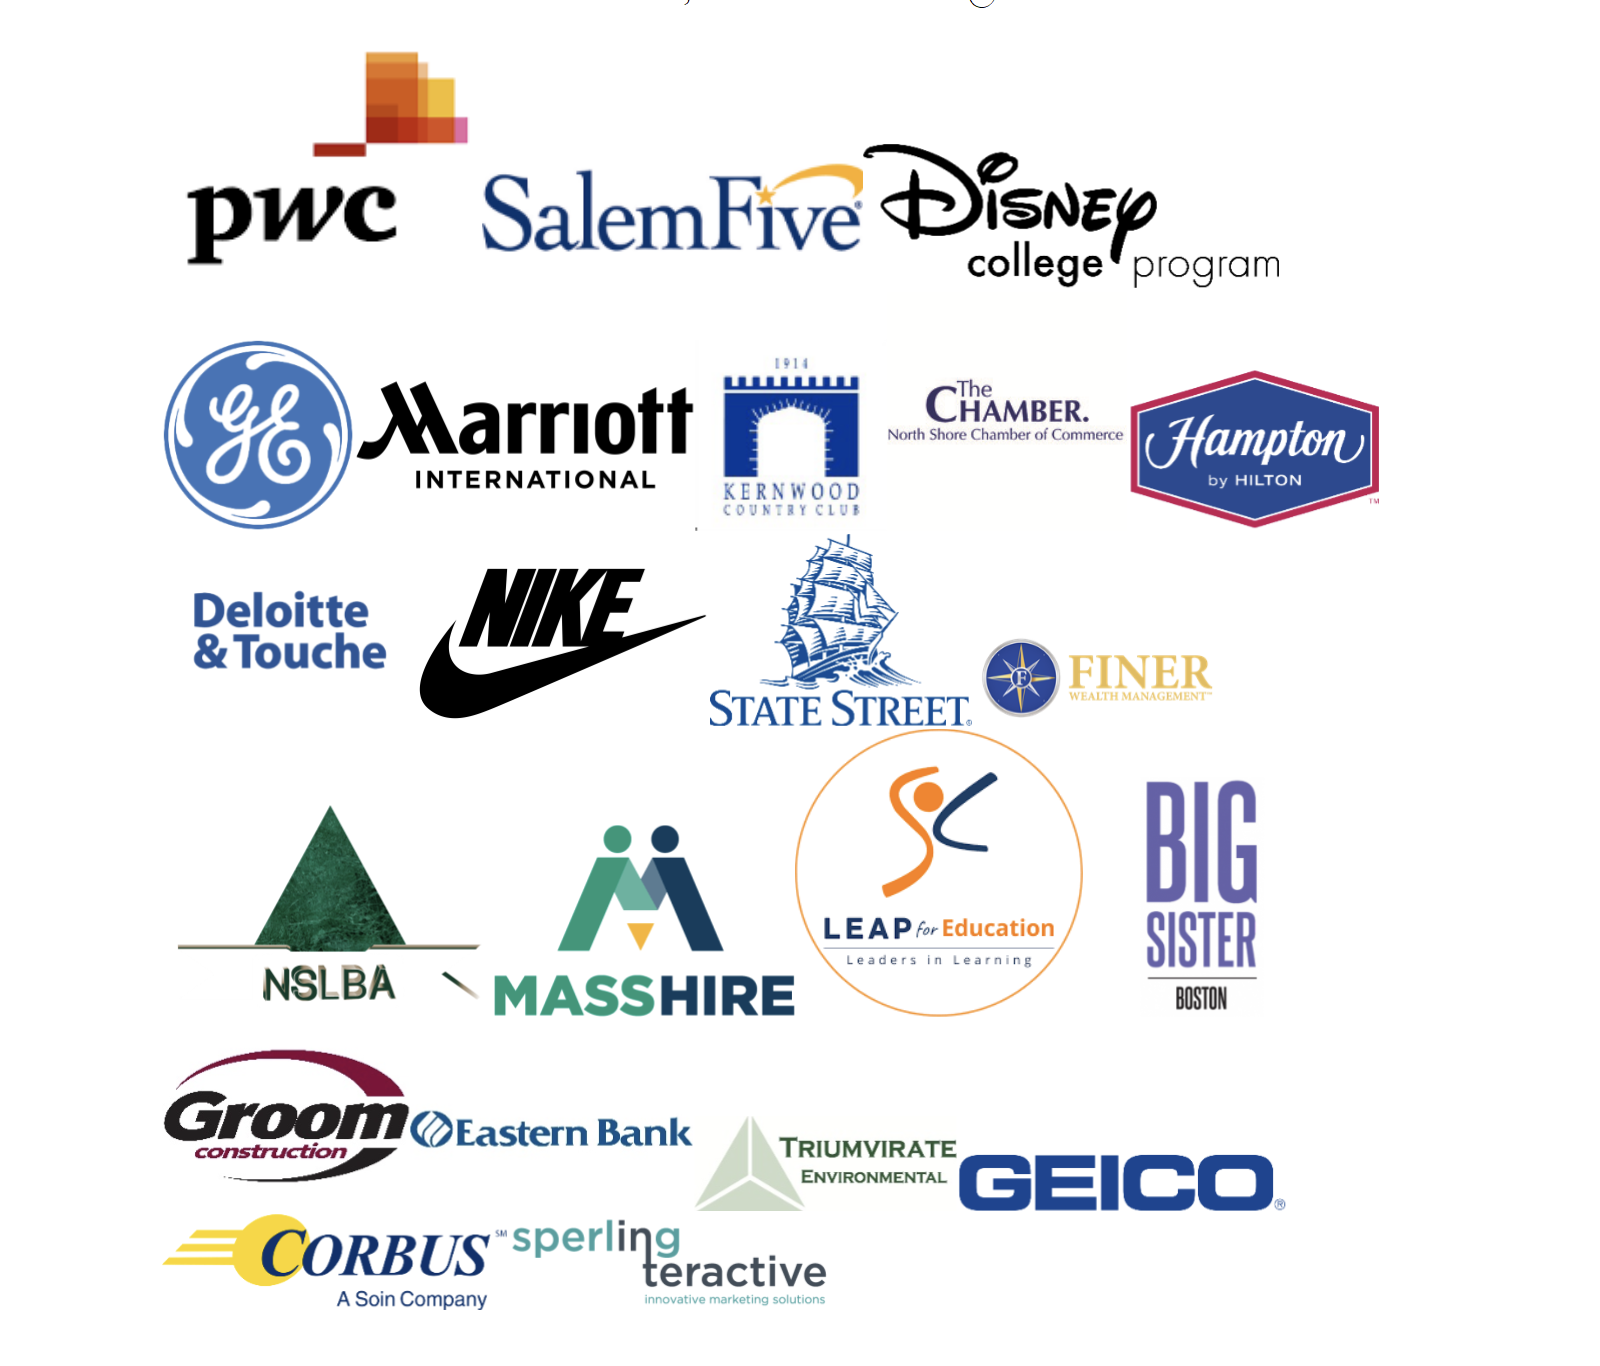 Logos of PWC, SalemFive, Disney College Program, GE, Marriott, Kernwood Country Club, North Shore Chamber, Hampton Inn, Deloitte & Touche, Nike, State Street, Finer Wealth Management, MSLBA, MASSHire, LEAP for Education, Big Sister Boston, Groom Construction, Eastern Bank, Triumvirate Environmental, Geico, Corbus, and Sperling Interactive